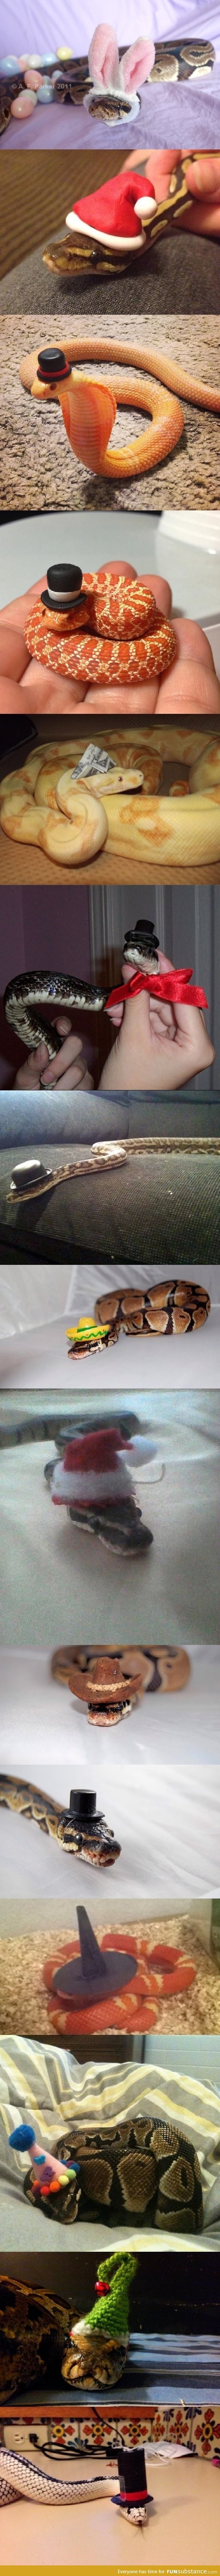 Snakes with hats